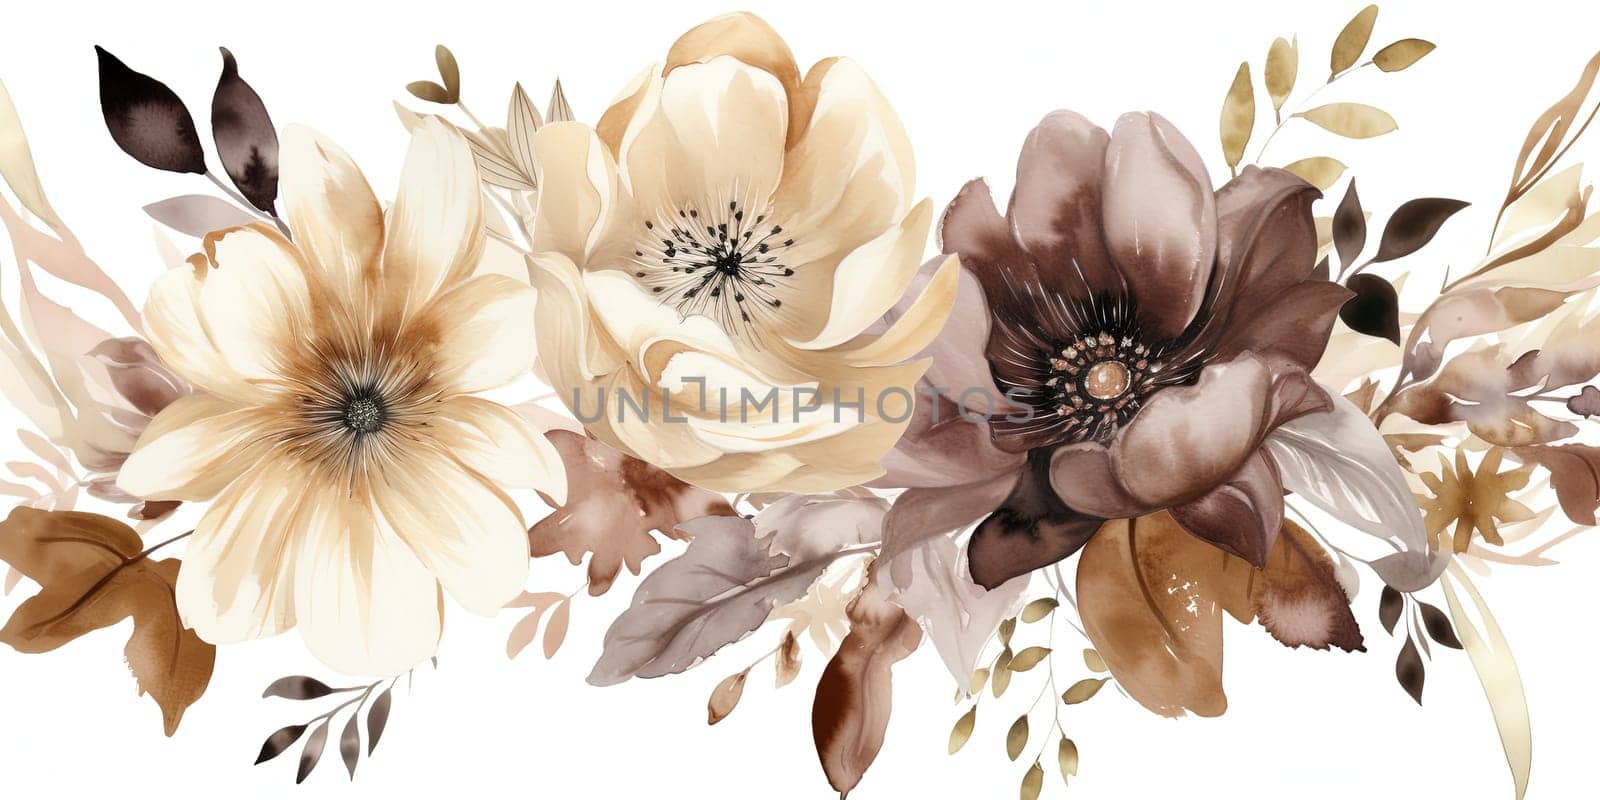 Watercolor Pattern Illustration In Boho Style With Summer Flowers, Isolated On White Background